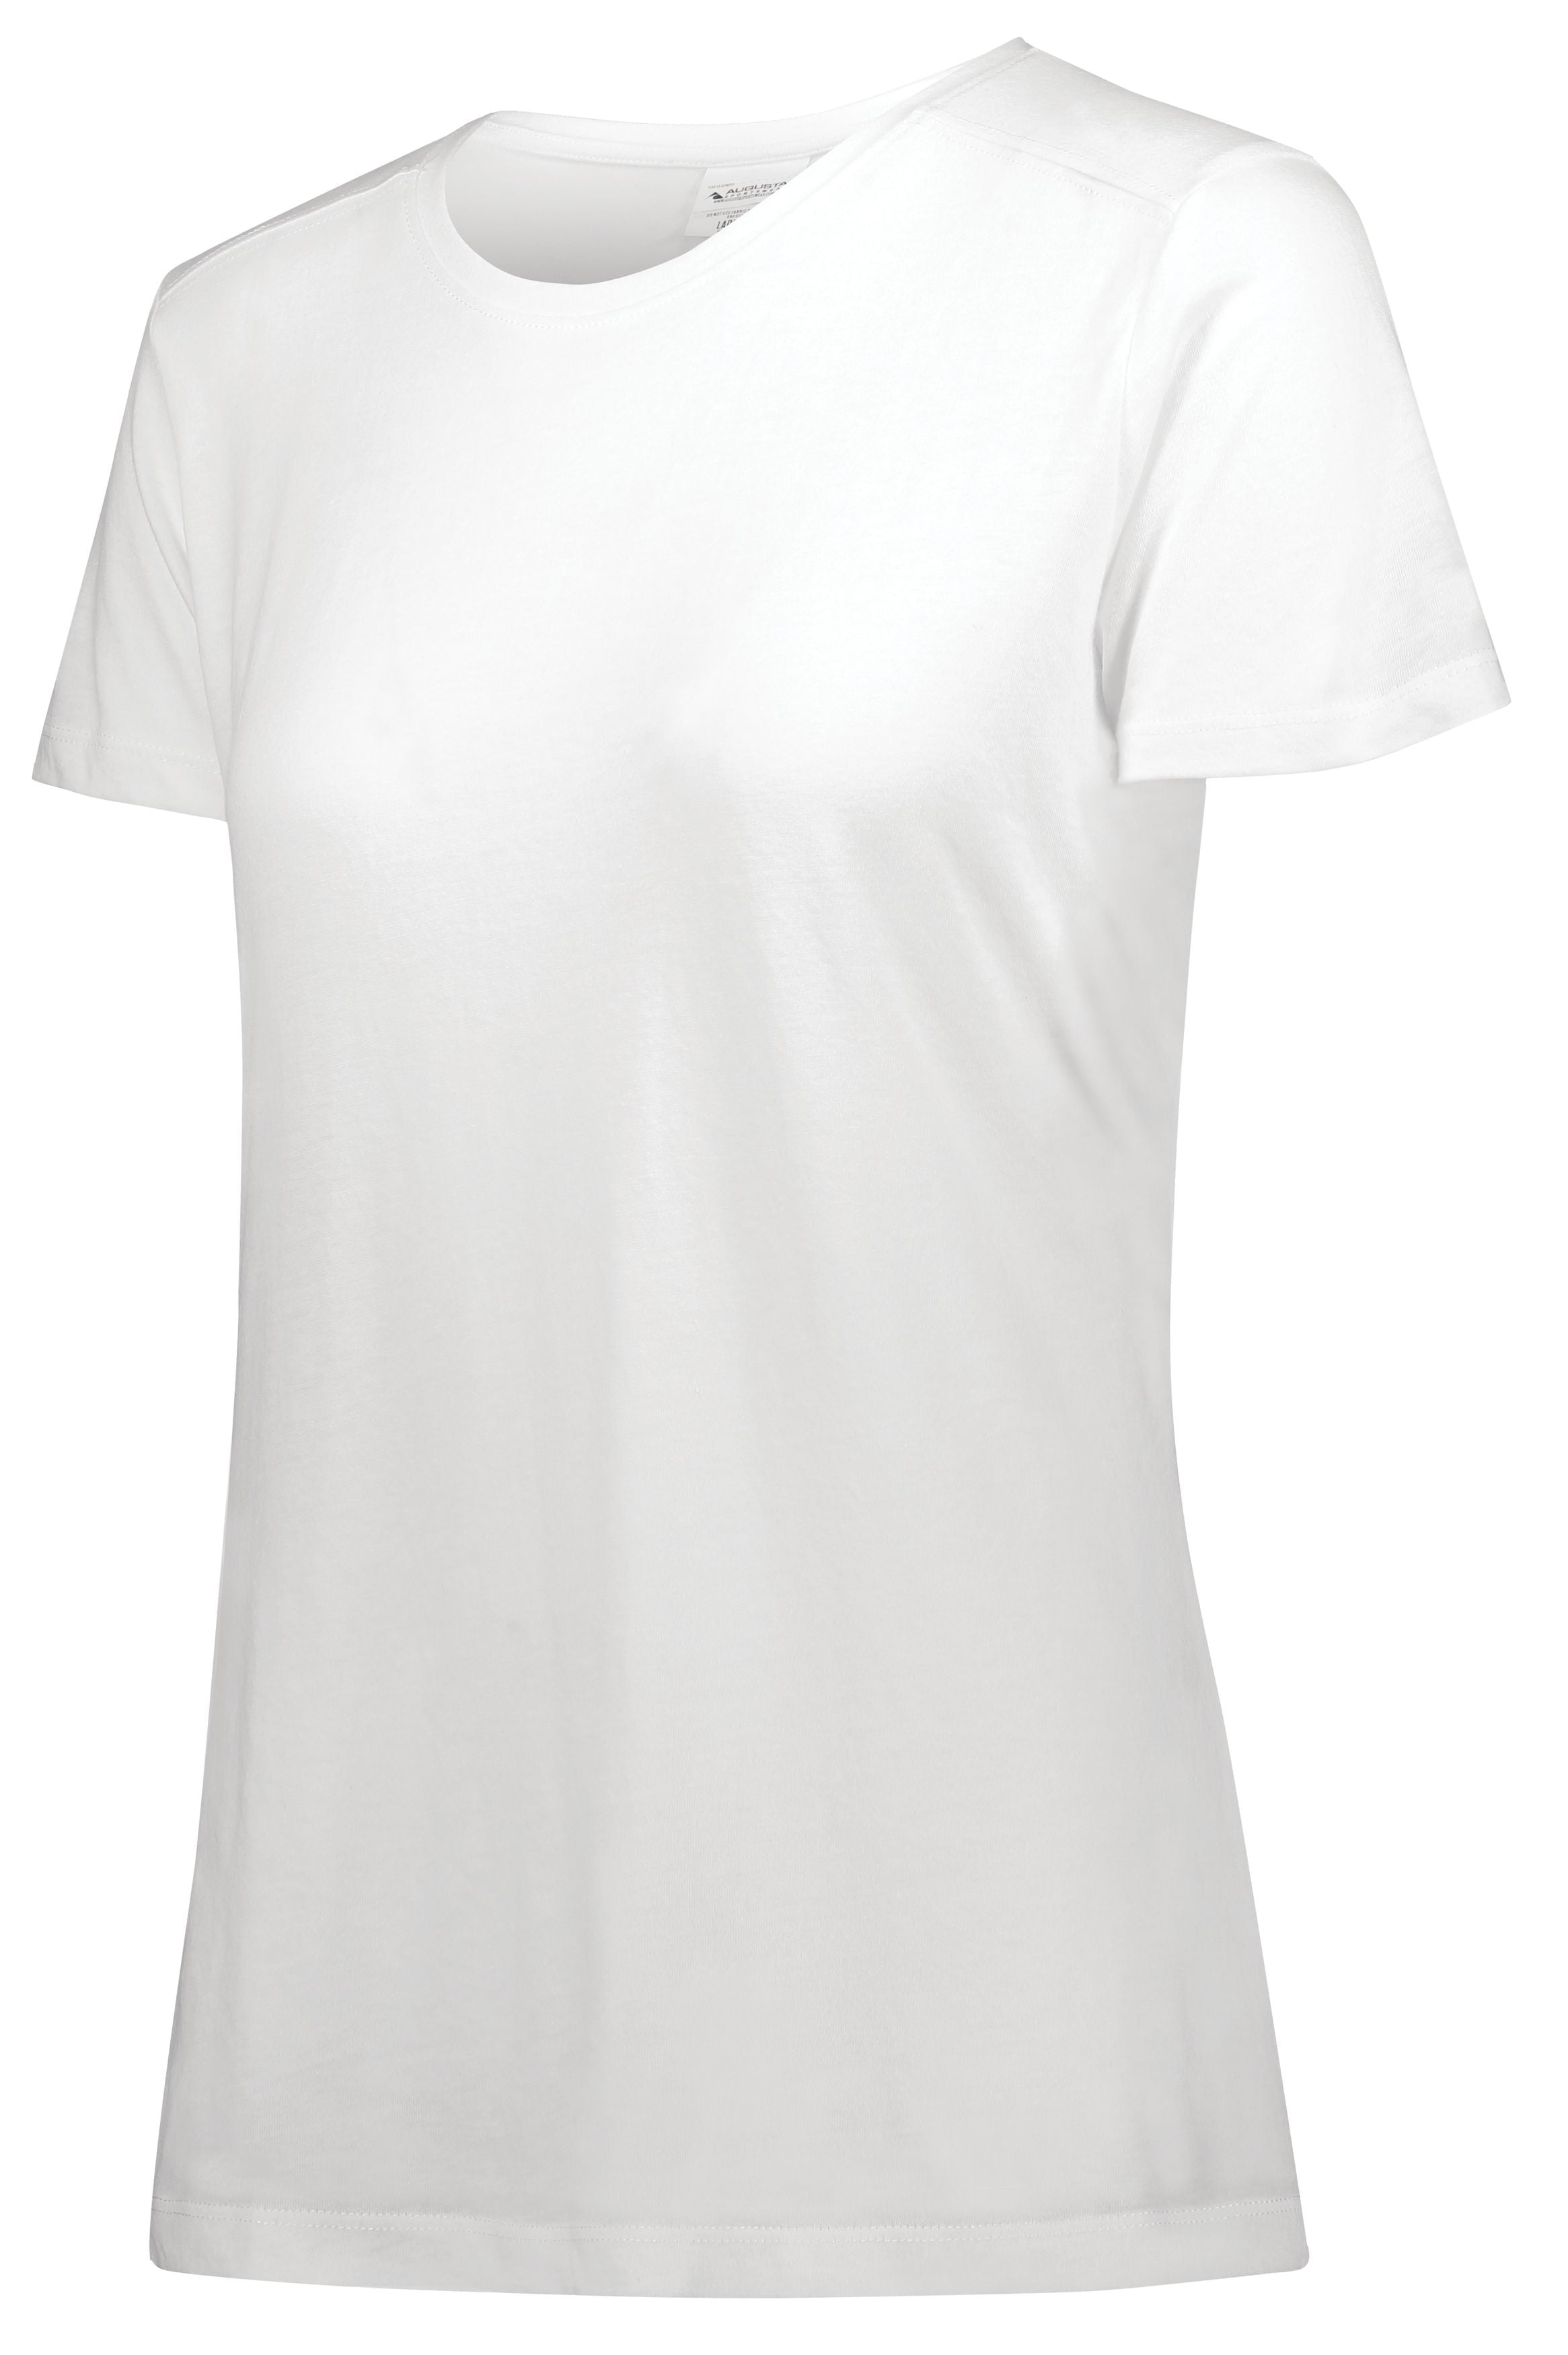 Augusta Sportswear Ladies Tri-Blend T-Shirt in White  -Part of the Ladies, Ladies-Tee-Shirt, T-Shirts, Augusta-Products, Shirts product lines at KanaleyCreations.com